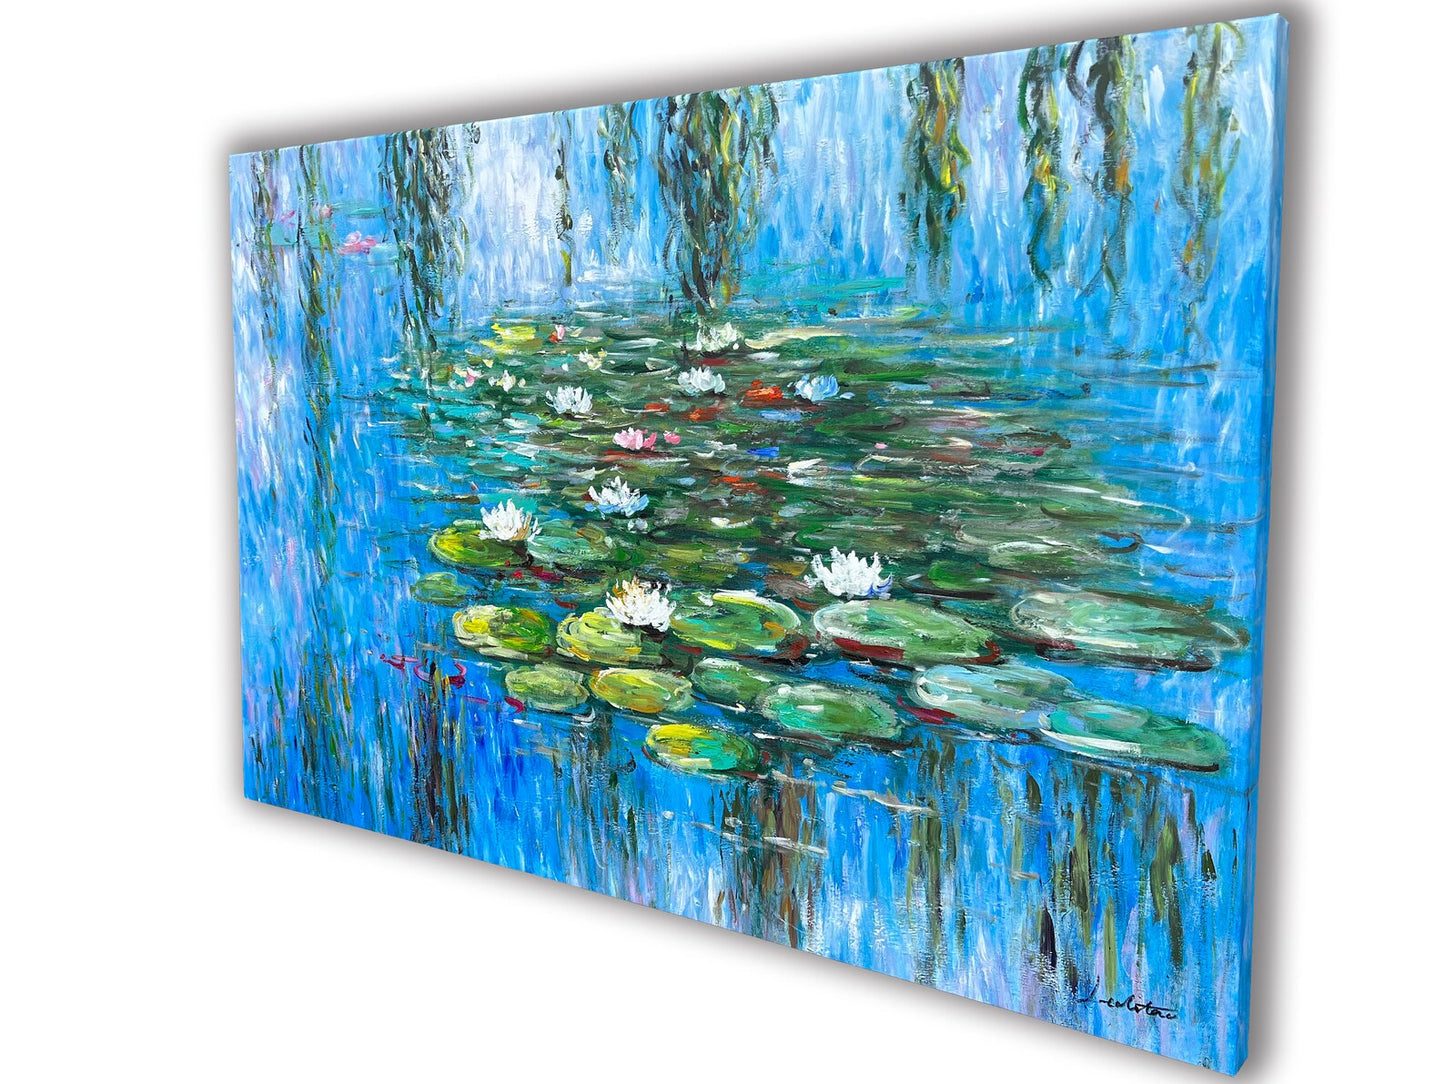 Impressionist Beauty - "Water Lilies in Spring" Oil Painting Hand-painted high quality modern art - Wrapped Canvas painting